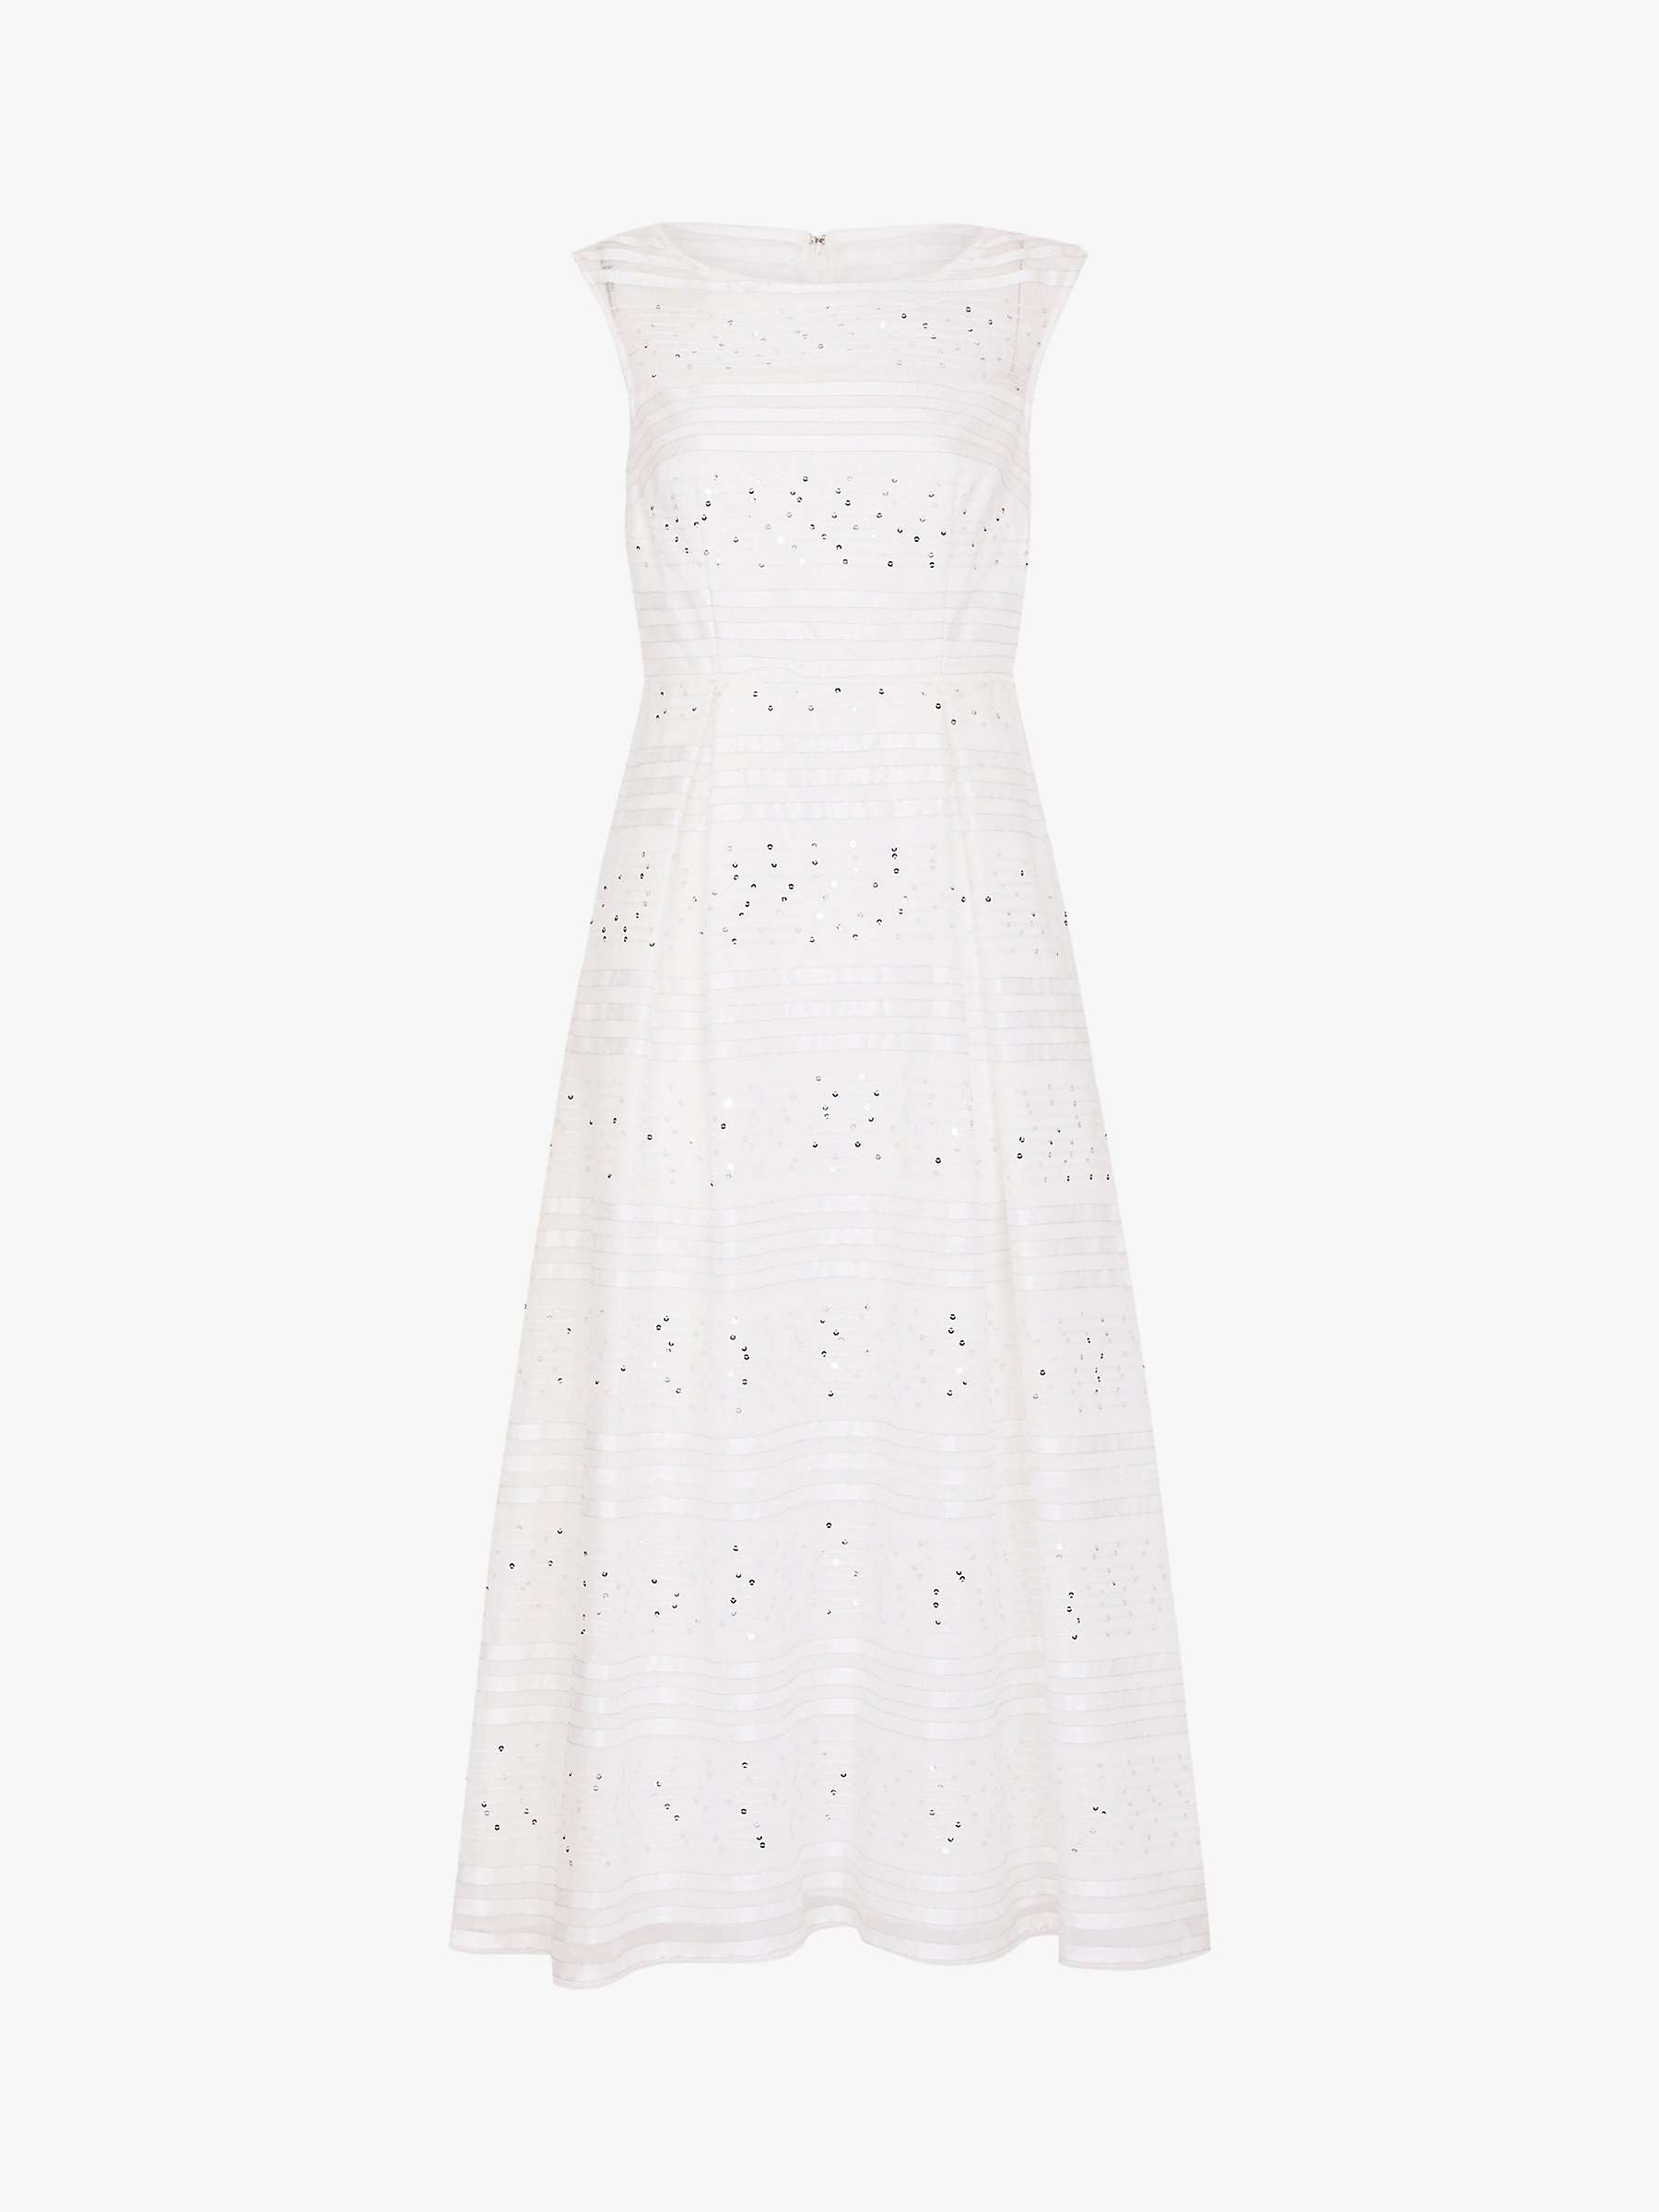 Adrianna Papell Ribbon Cocktail Dress, Ivory/Silver at John Lewis ...